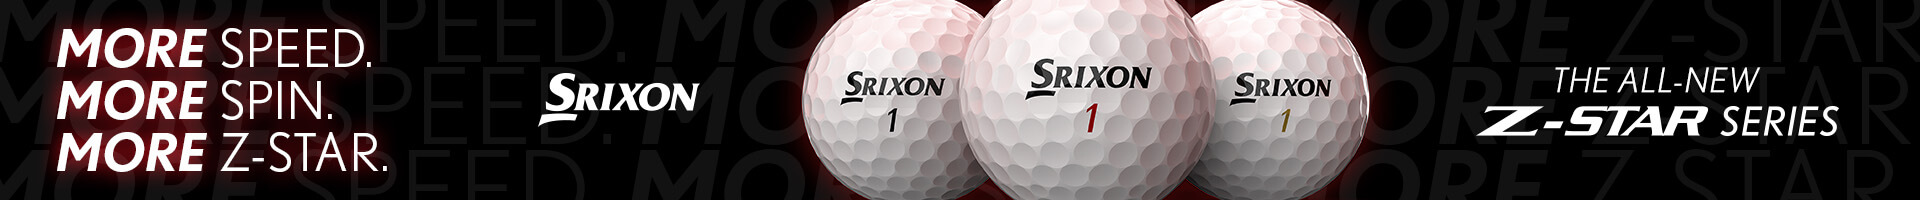 Srixon Z Star Series 8 Now Available